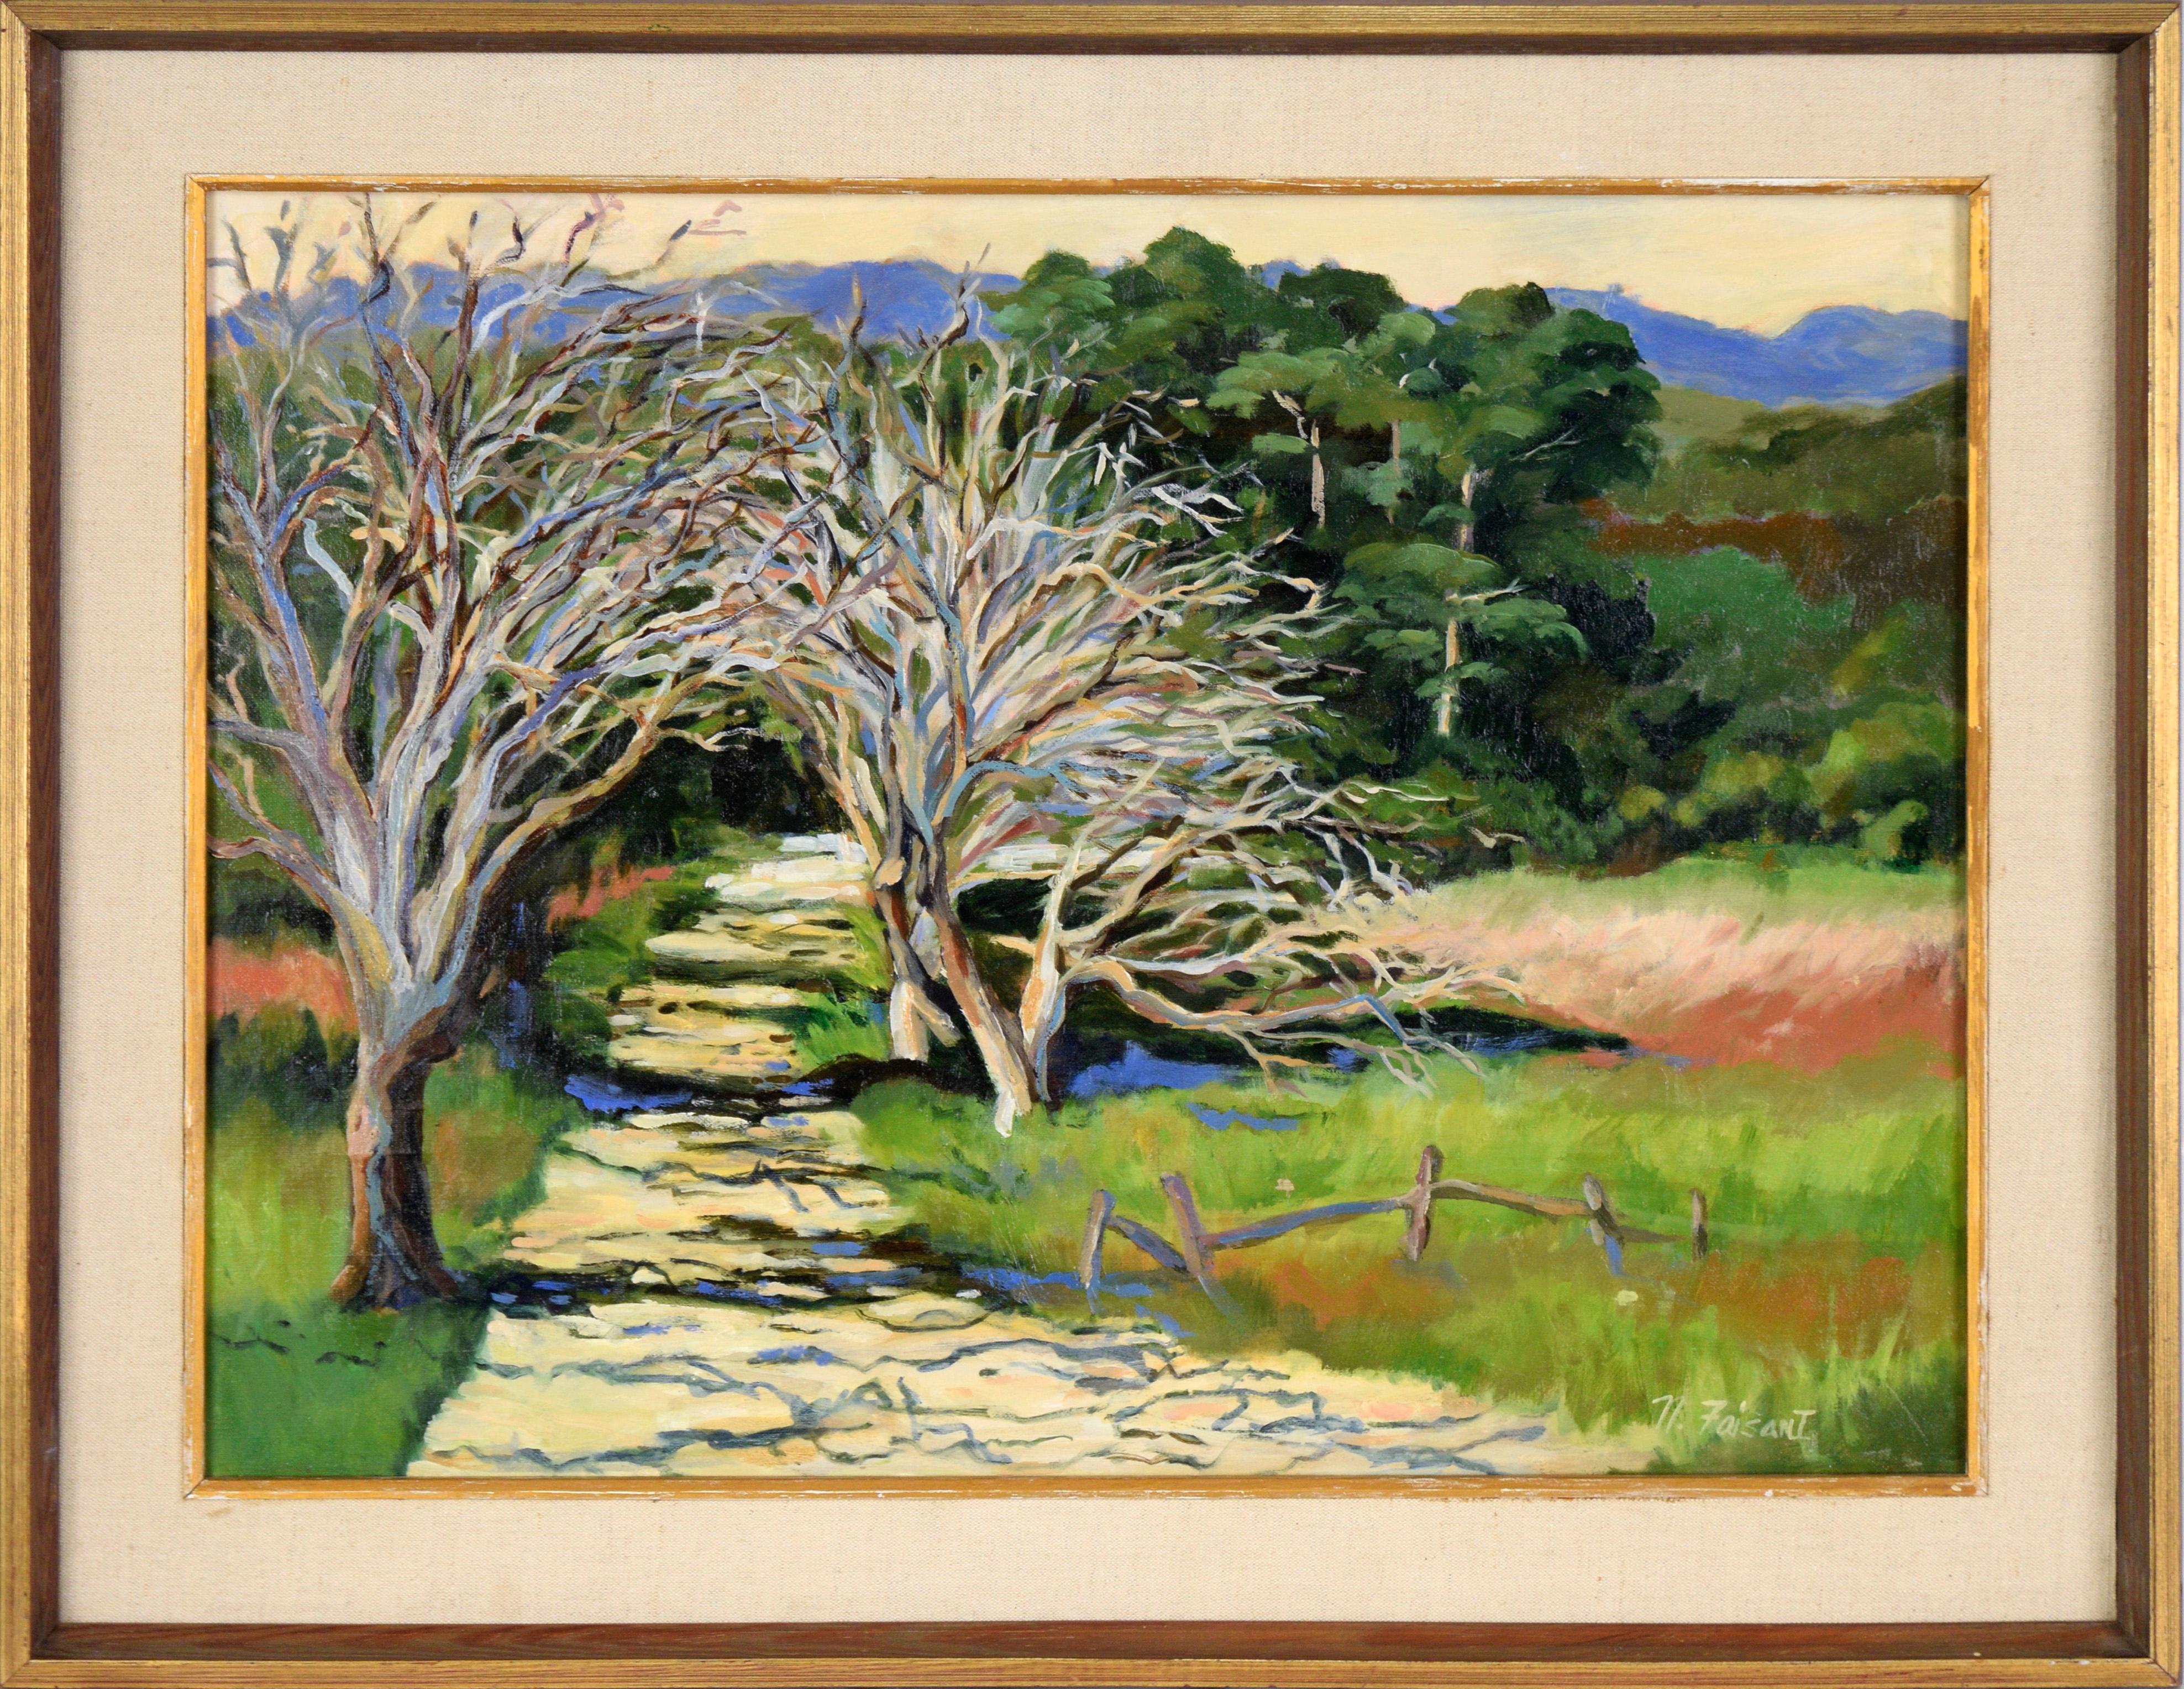 Nancy Faisant Landscape Painting - Shaded Path in the California Hills - Original Oil on Canvas (Laid on Board)